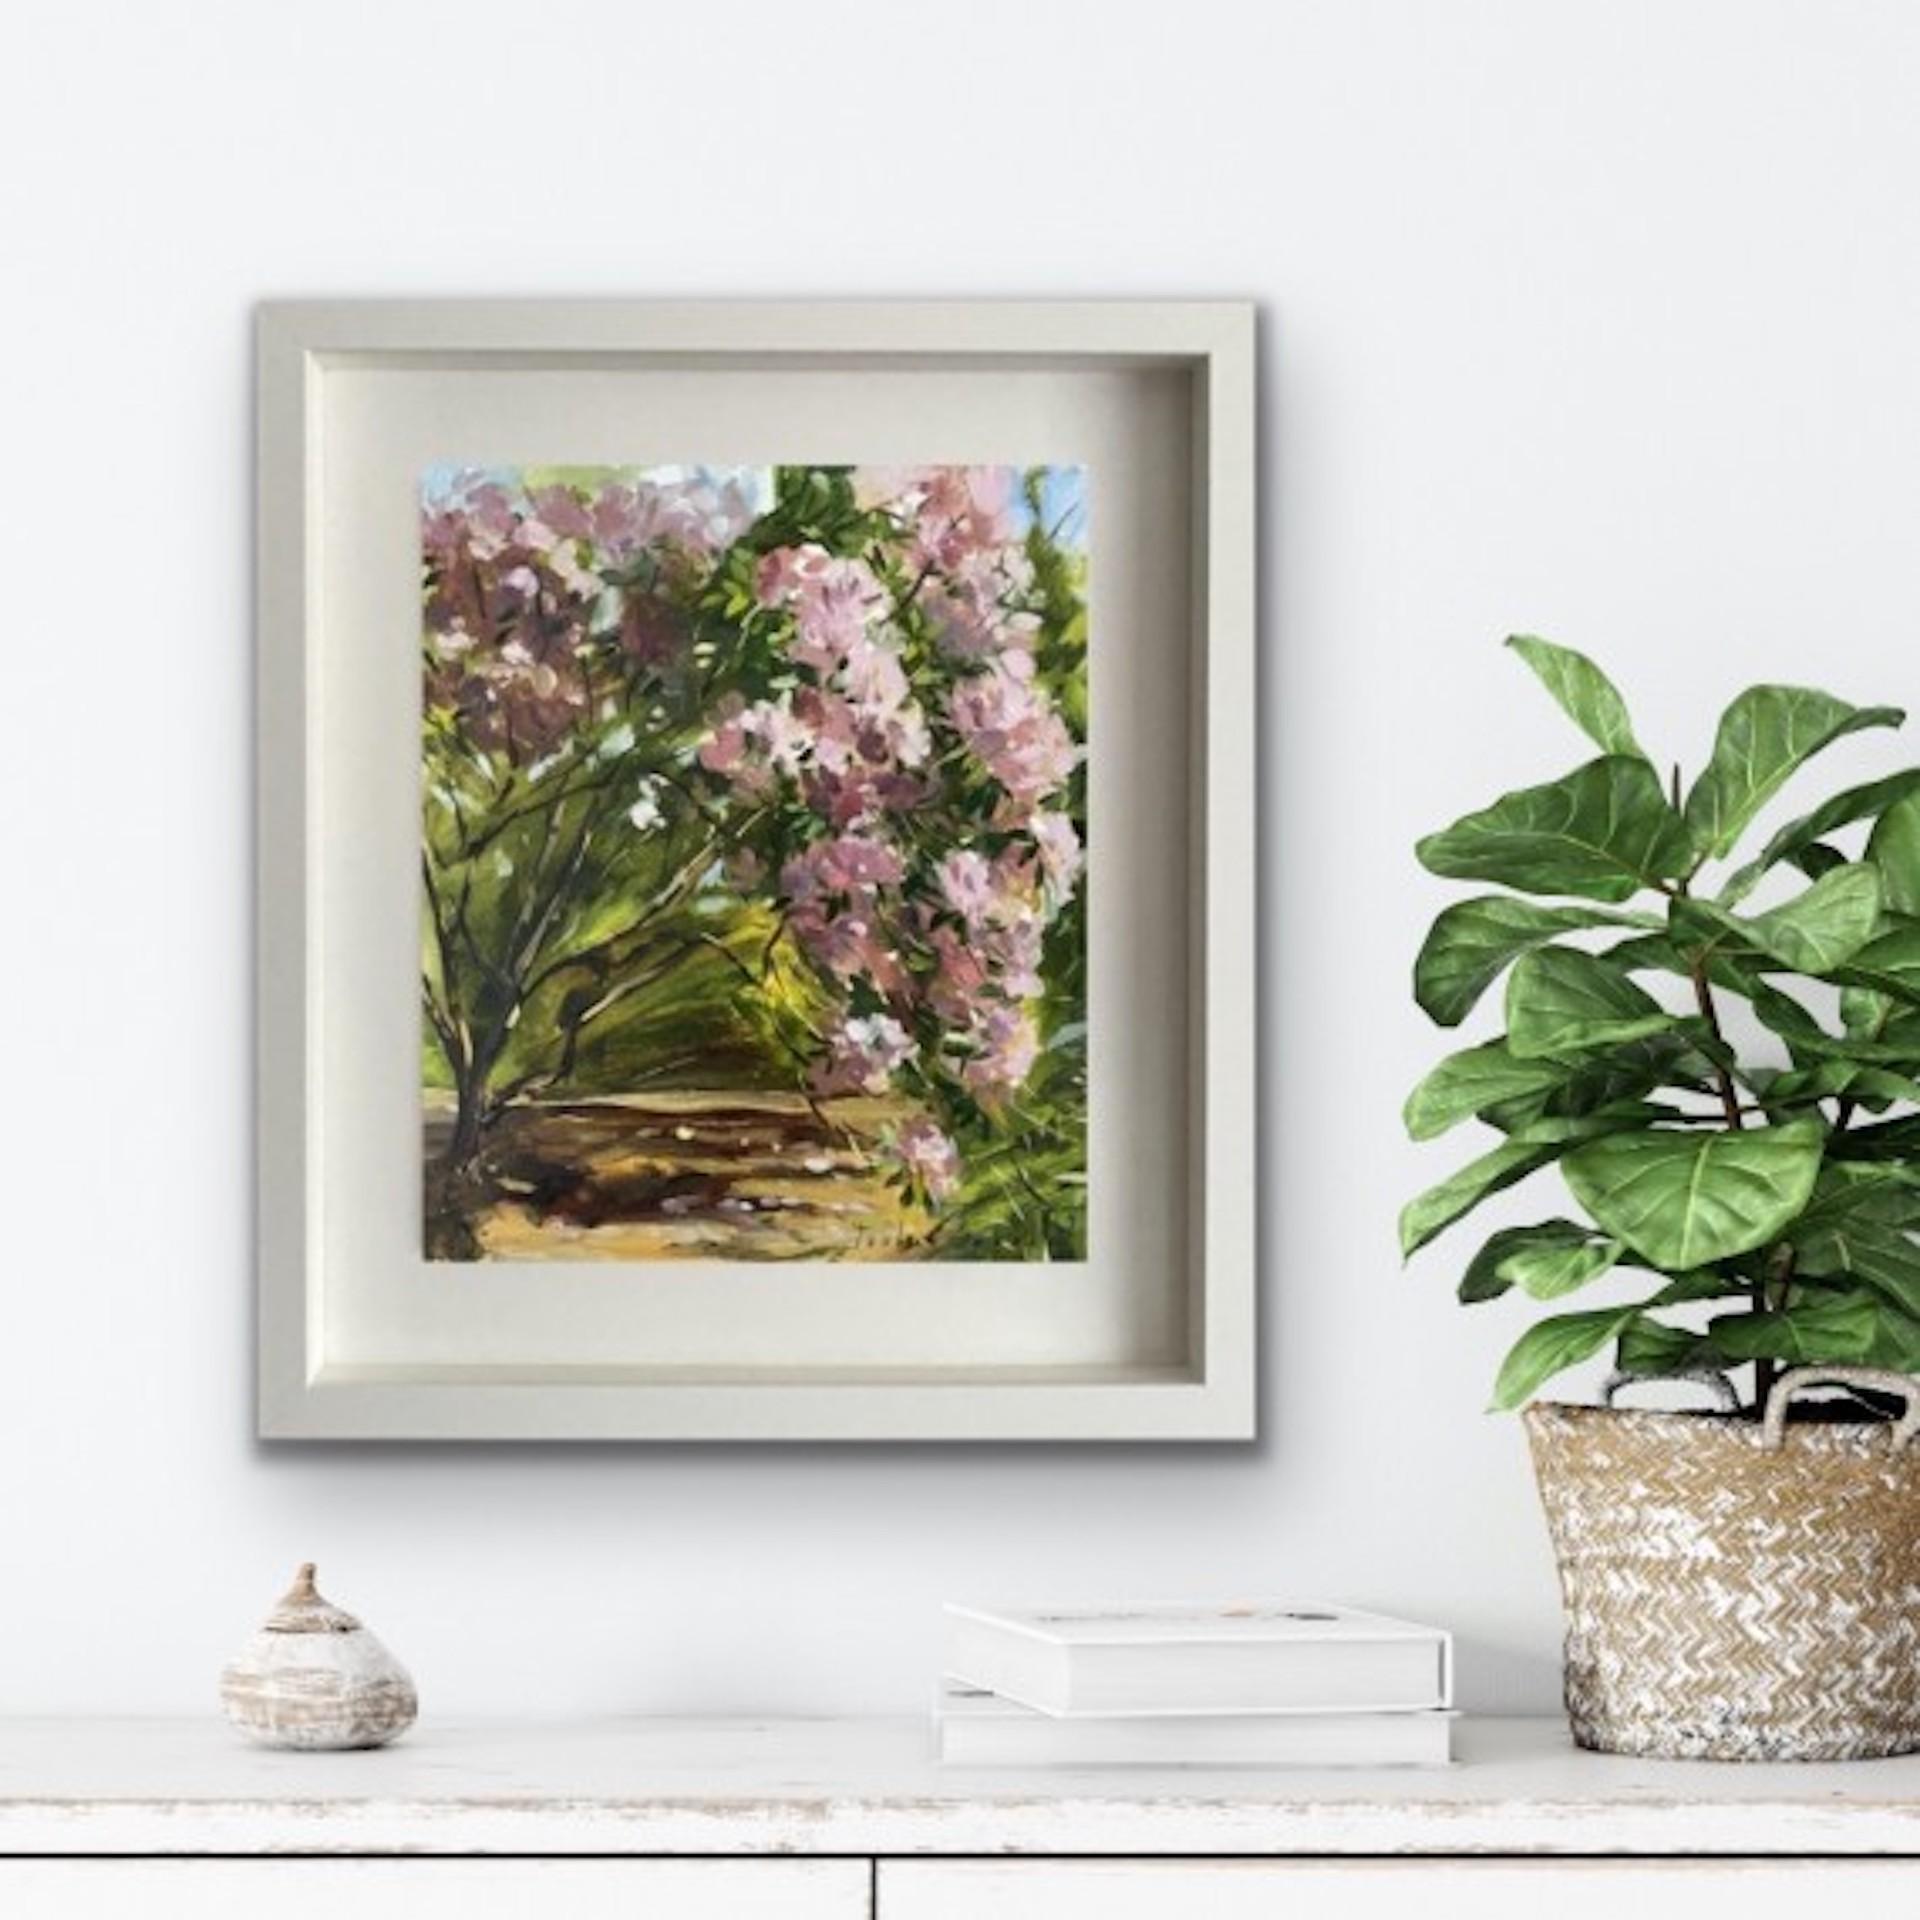 Pink Rhododendron by Tushar Sabale [2021]
Original
Oil on board
Image size: H:30 cm x W:25 cm
Complete Size of Unframed Work: H:30 cm x W:25 cm x D:1cm
Framed Size: H:43 cm x W:38 cm x D:3cm
Sold Framed
Please note that insitu images are purely an